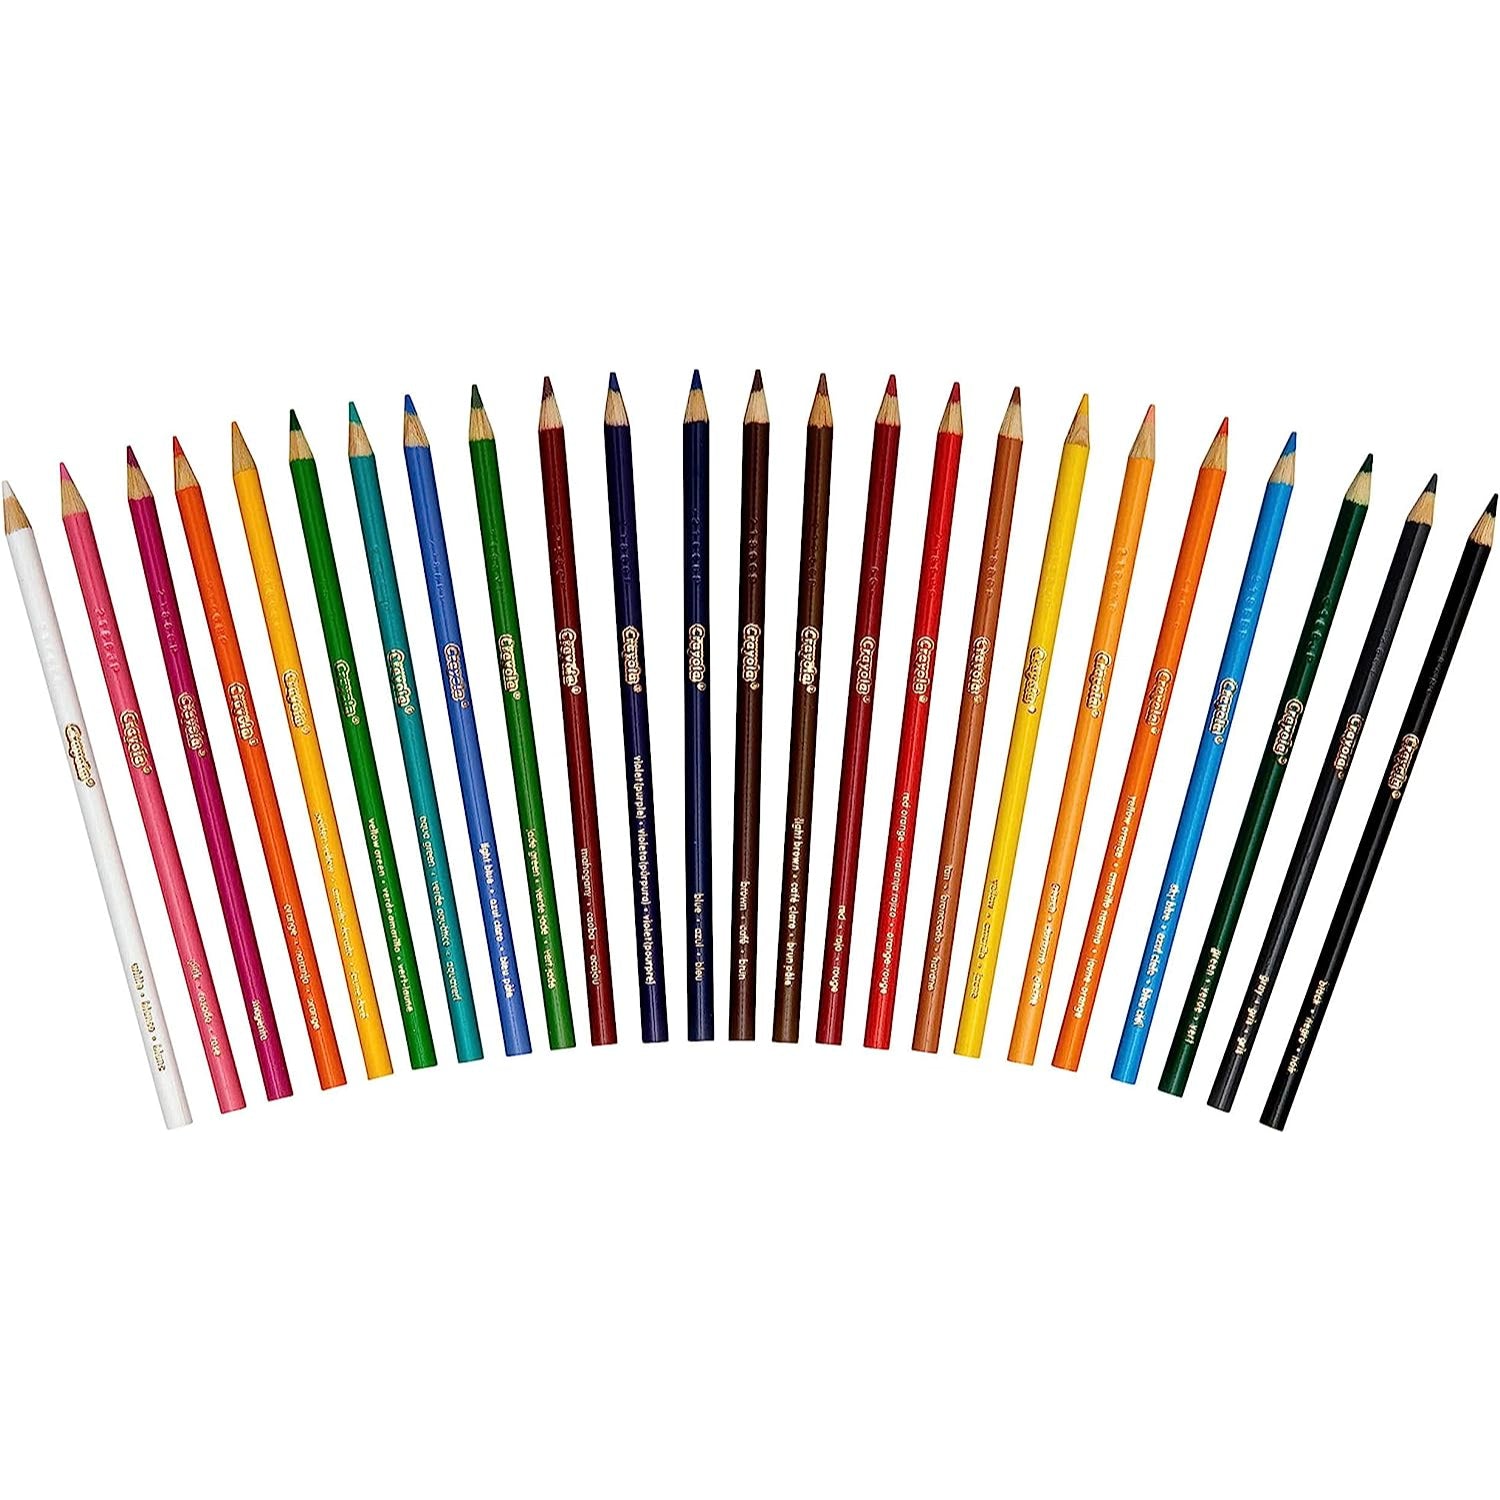 Crayola Colored Pencils, Assorted Colors, 24 count